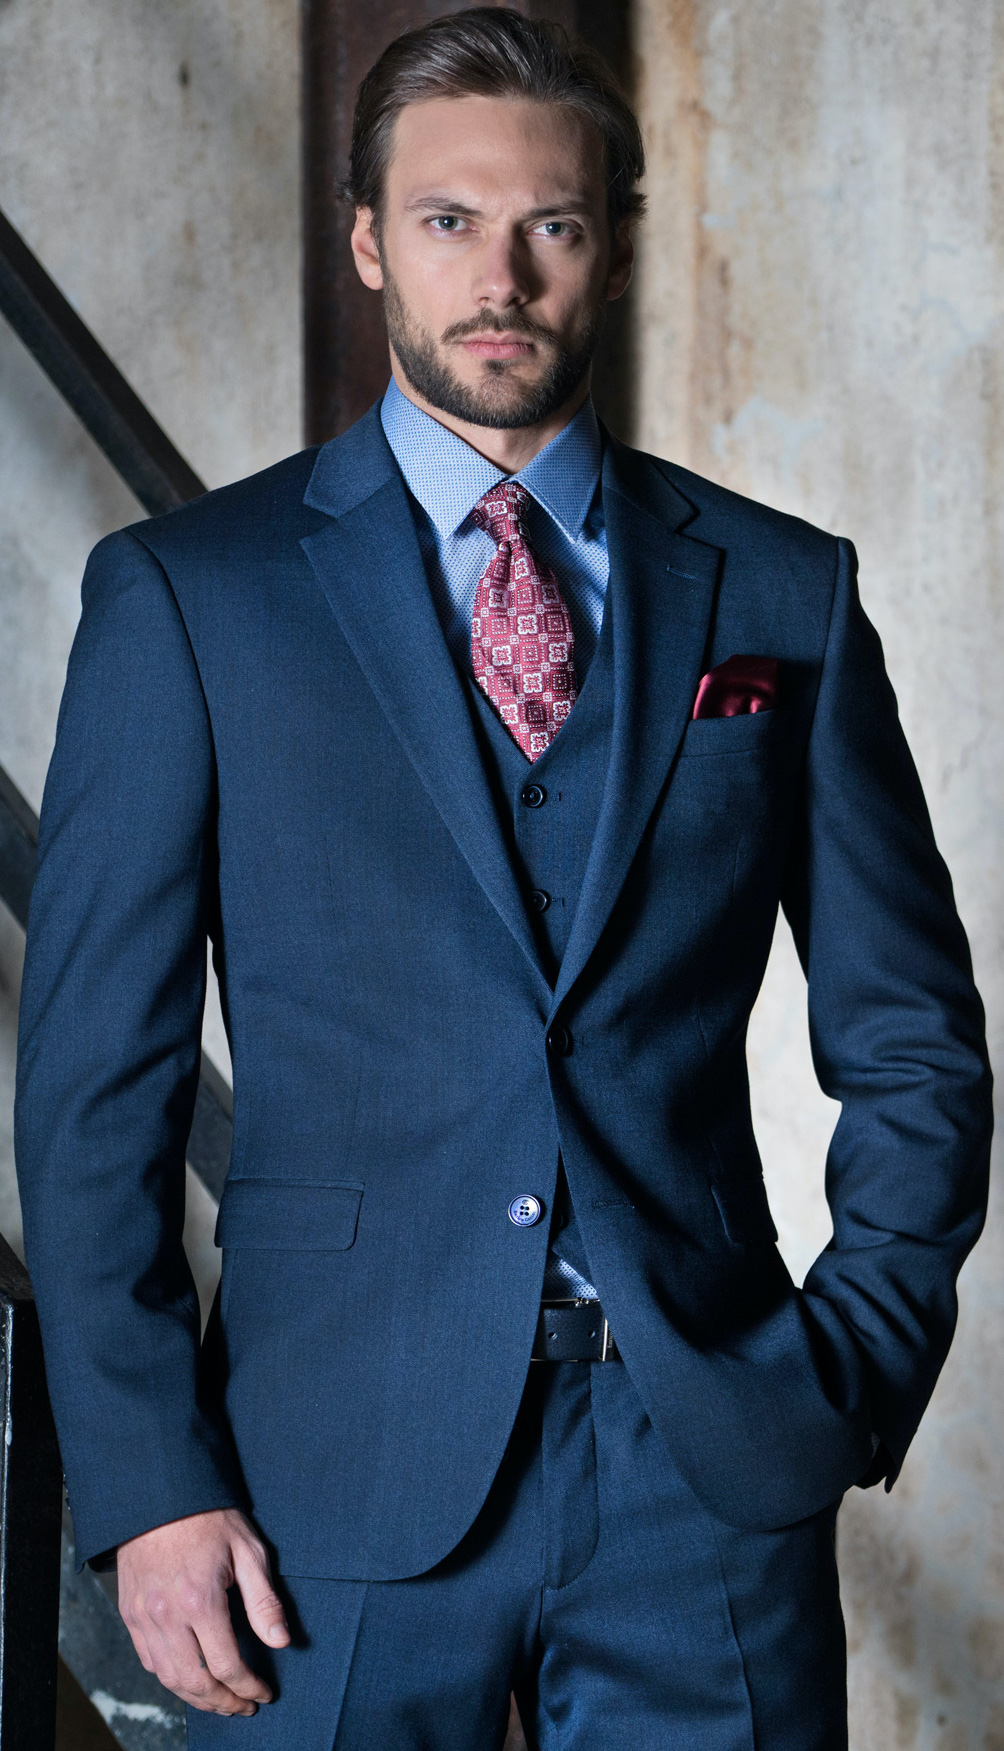 MALE MODELS IN SUITS: QUENTIN ÉMERY for ENRICO CERINI